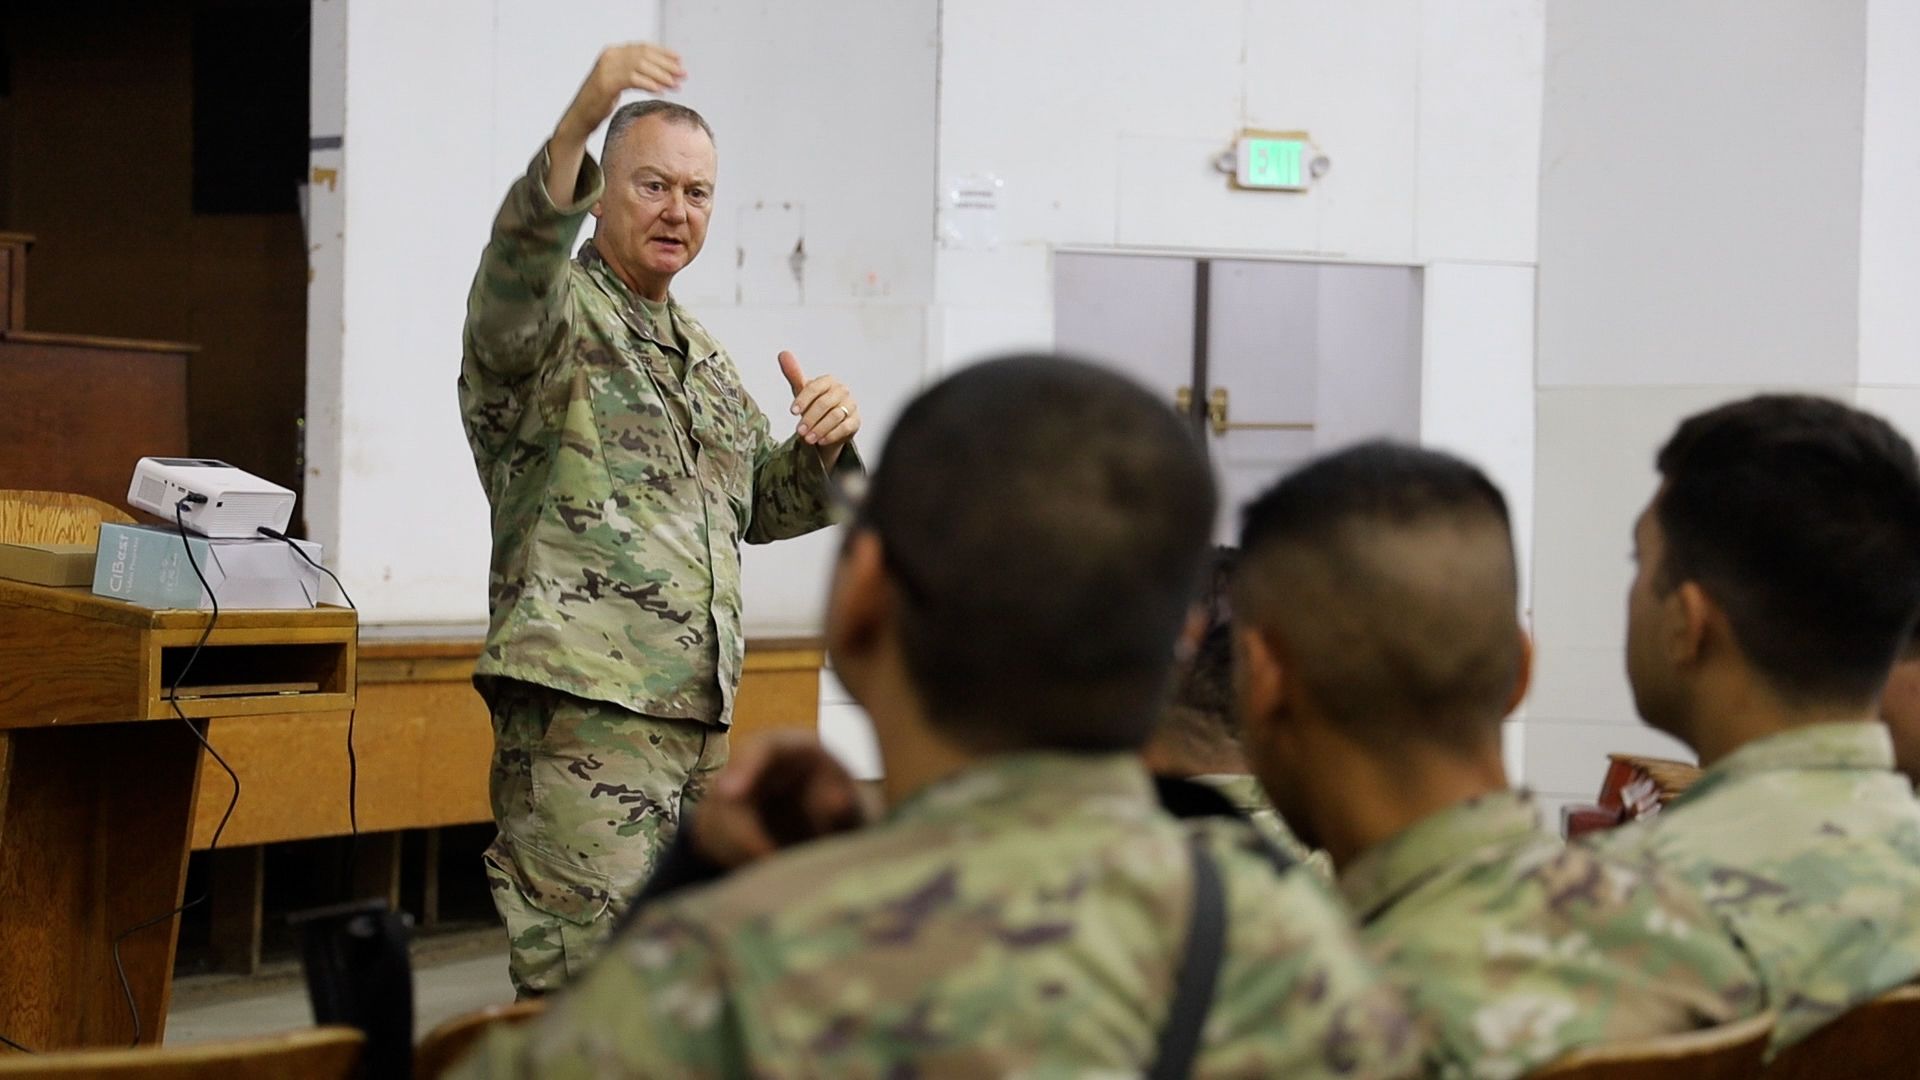 Soldier addresses other Soldiers in classroom